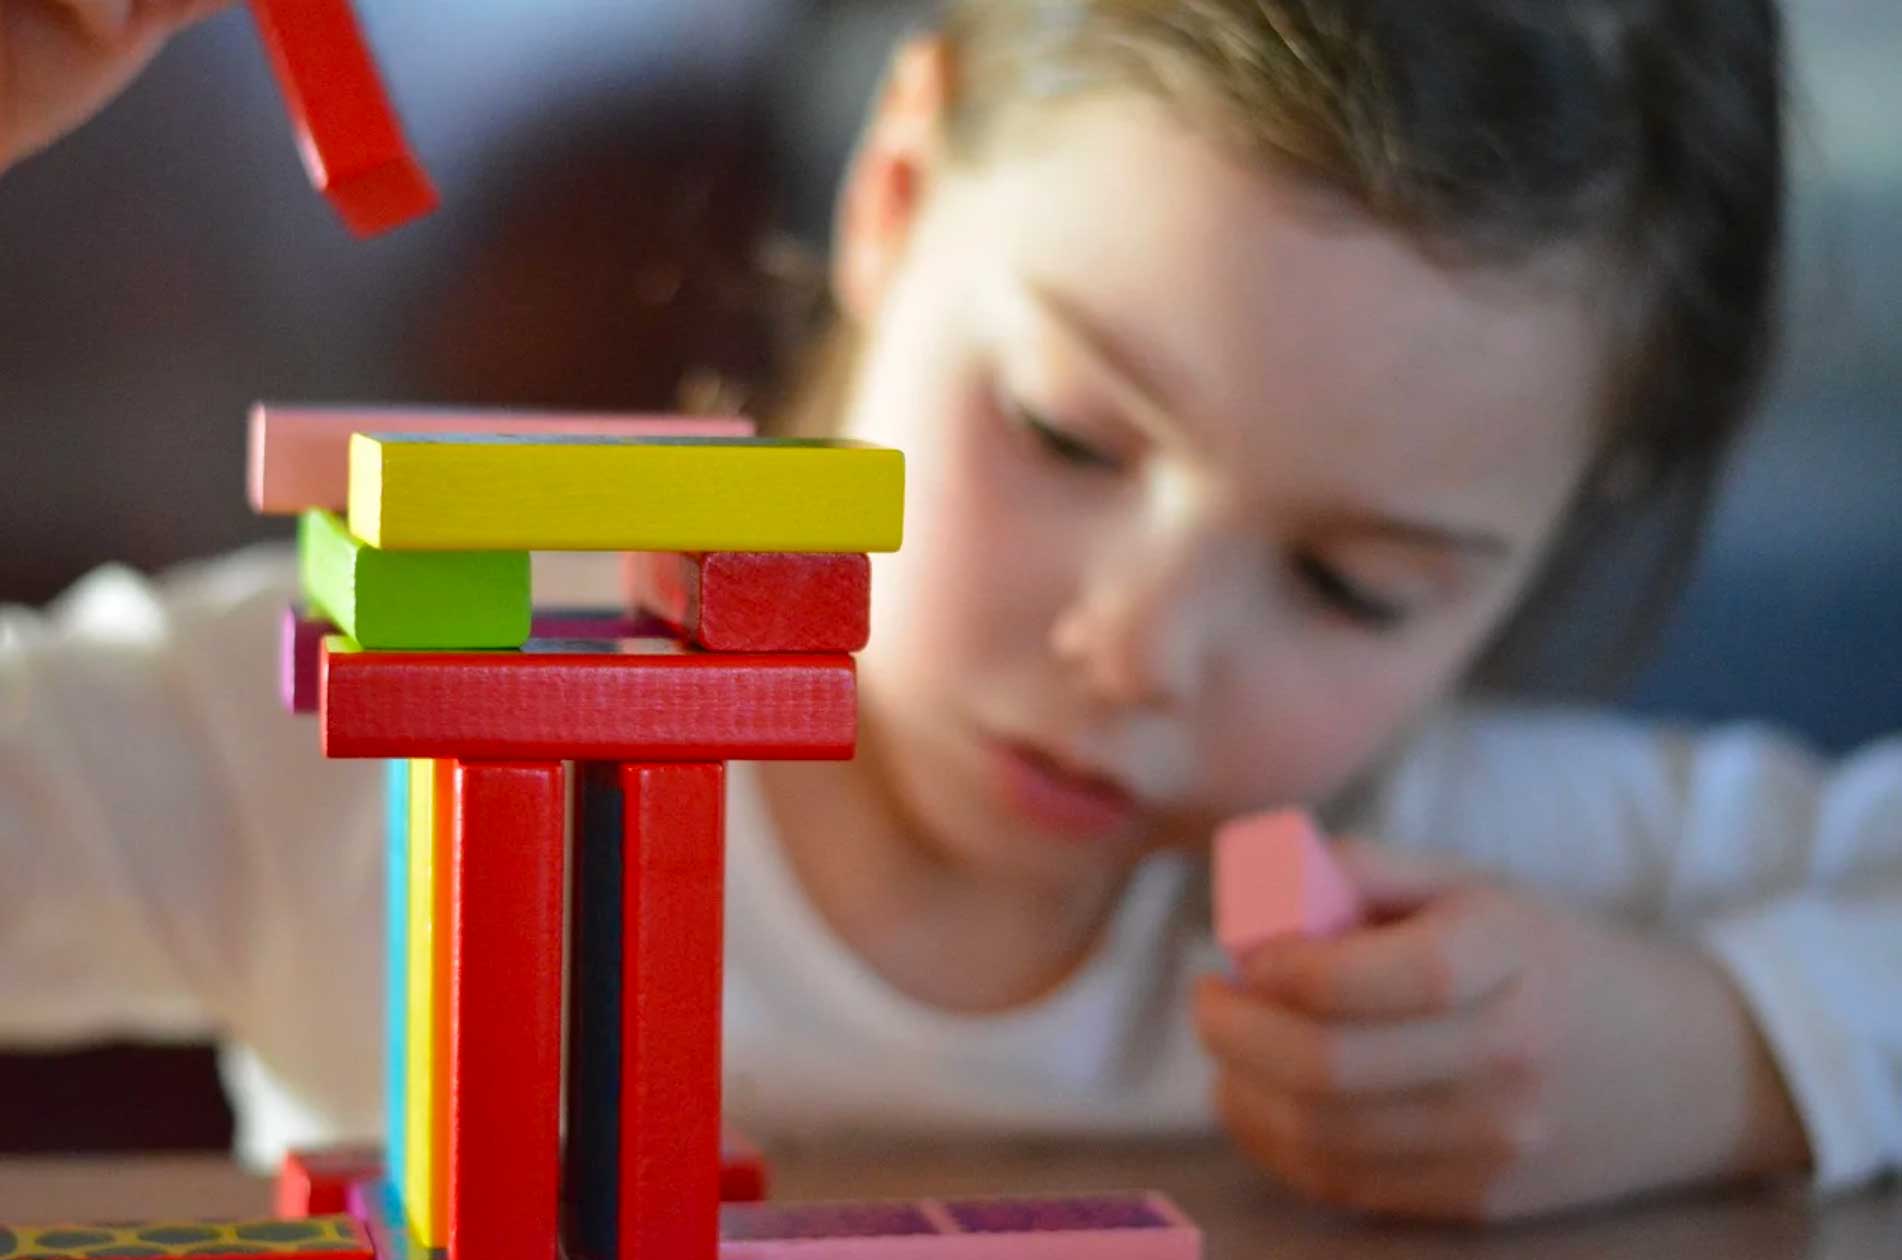 A young girl playing with colored wooden blocks.